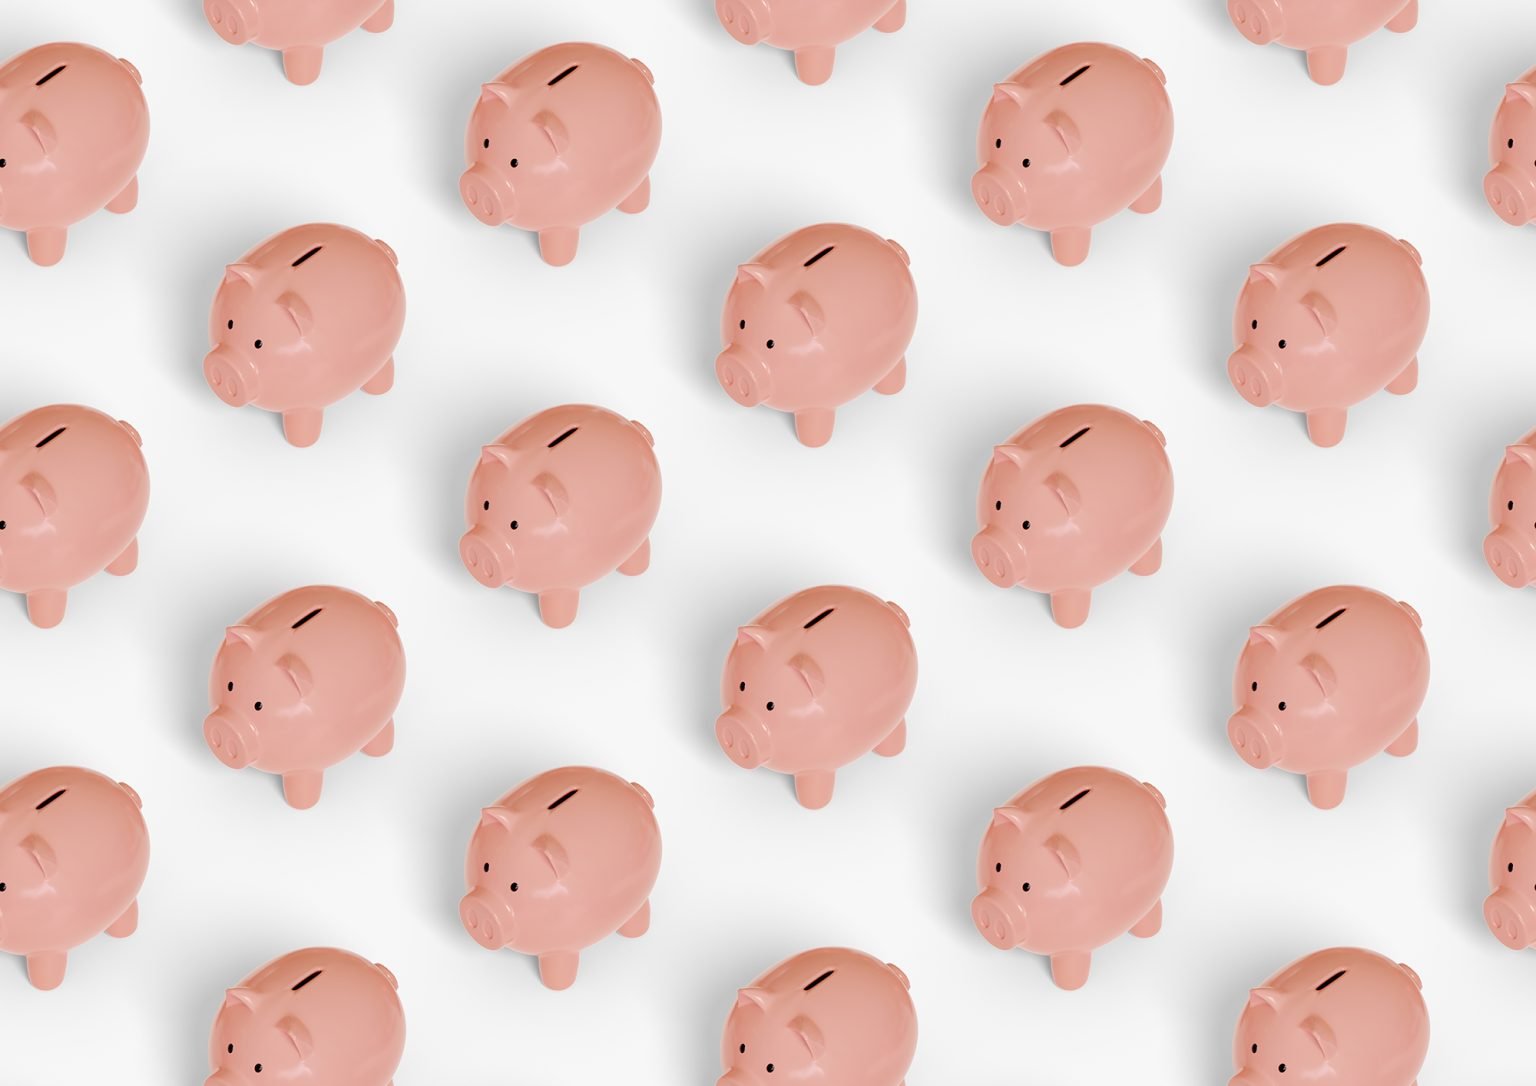 Rows of piggy banks of all equal size